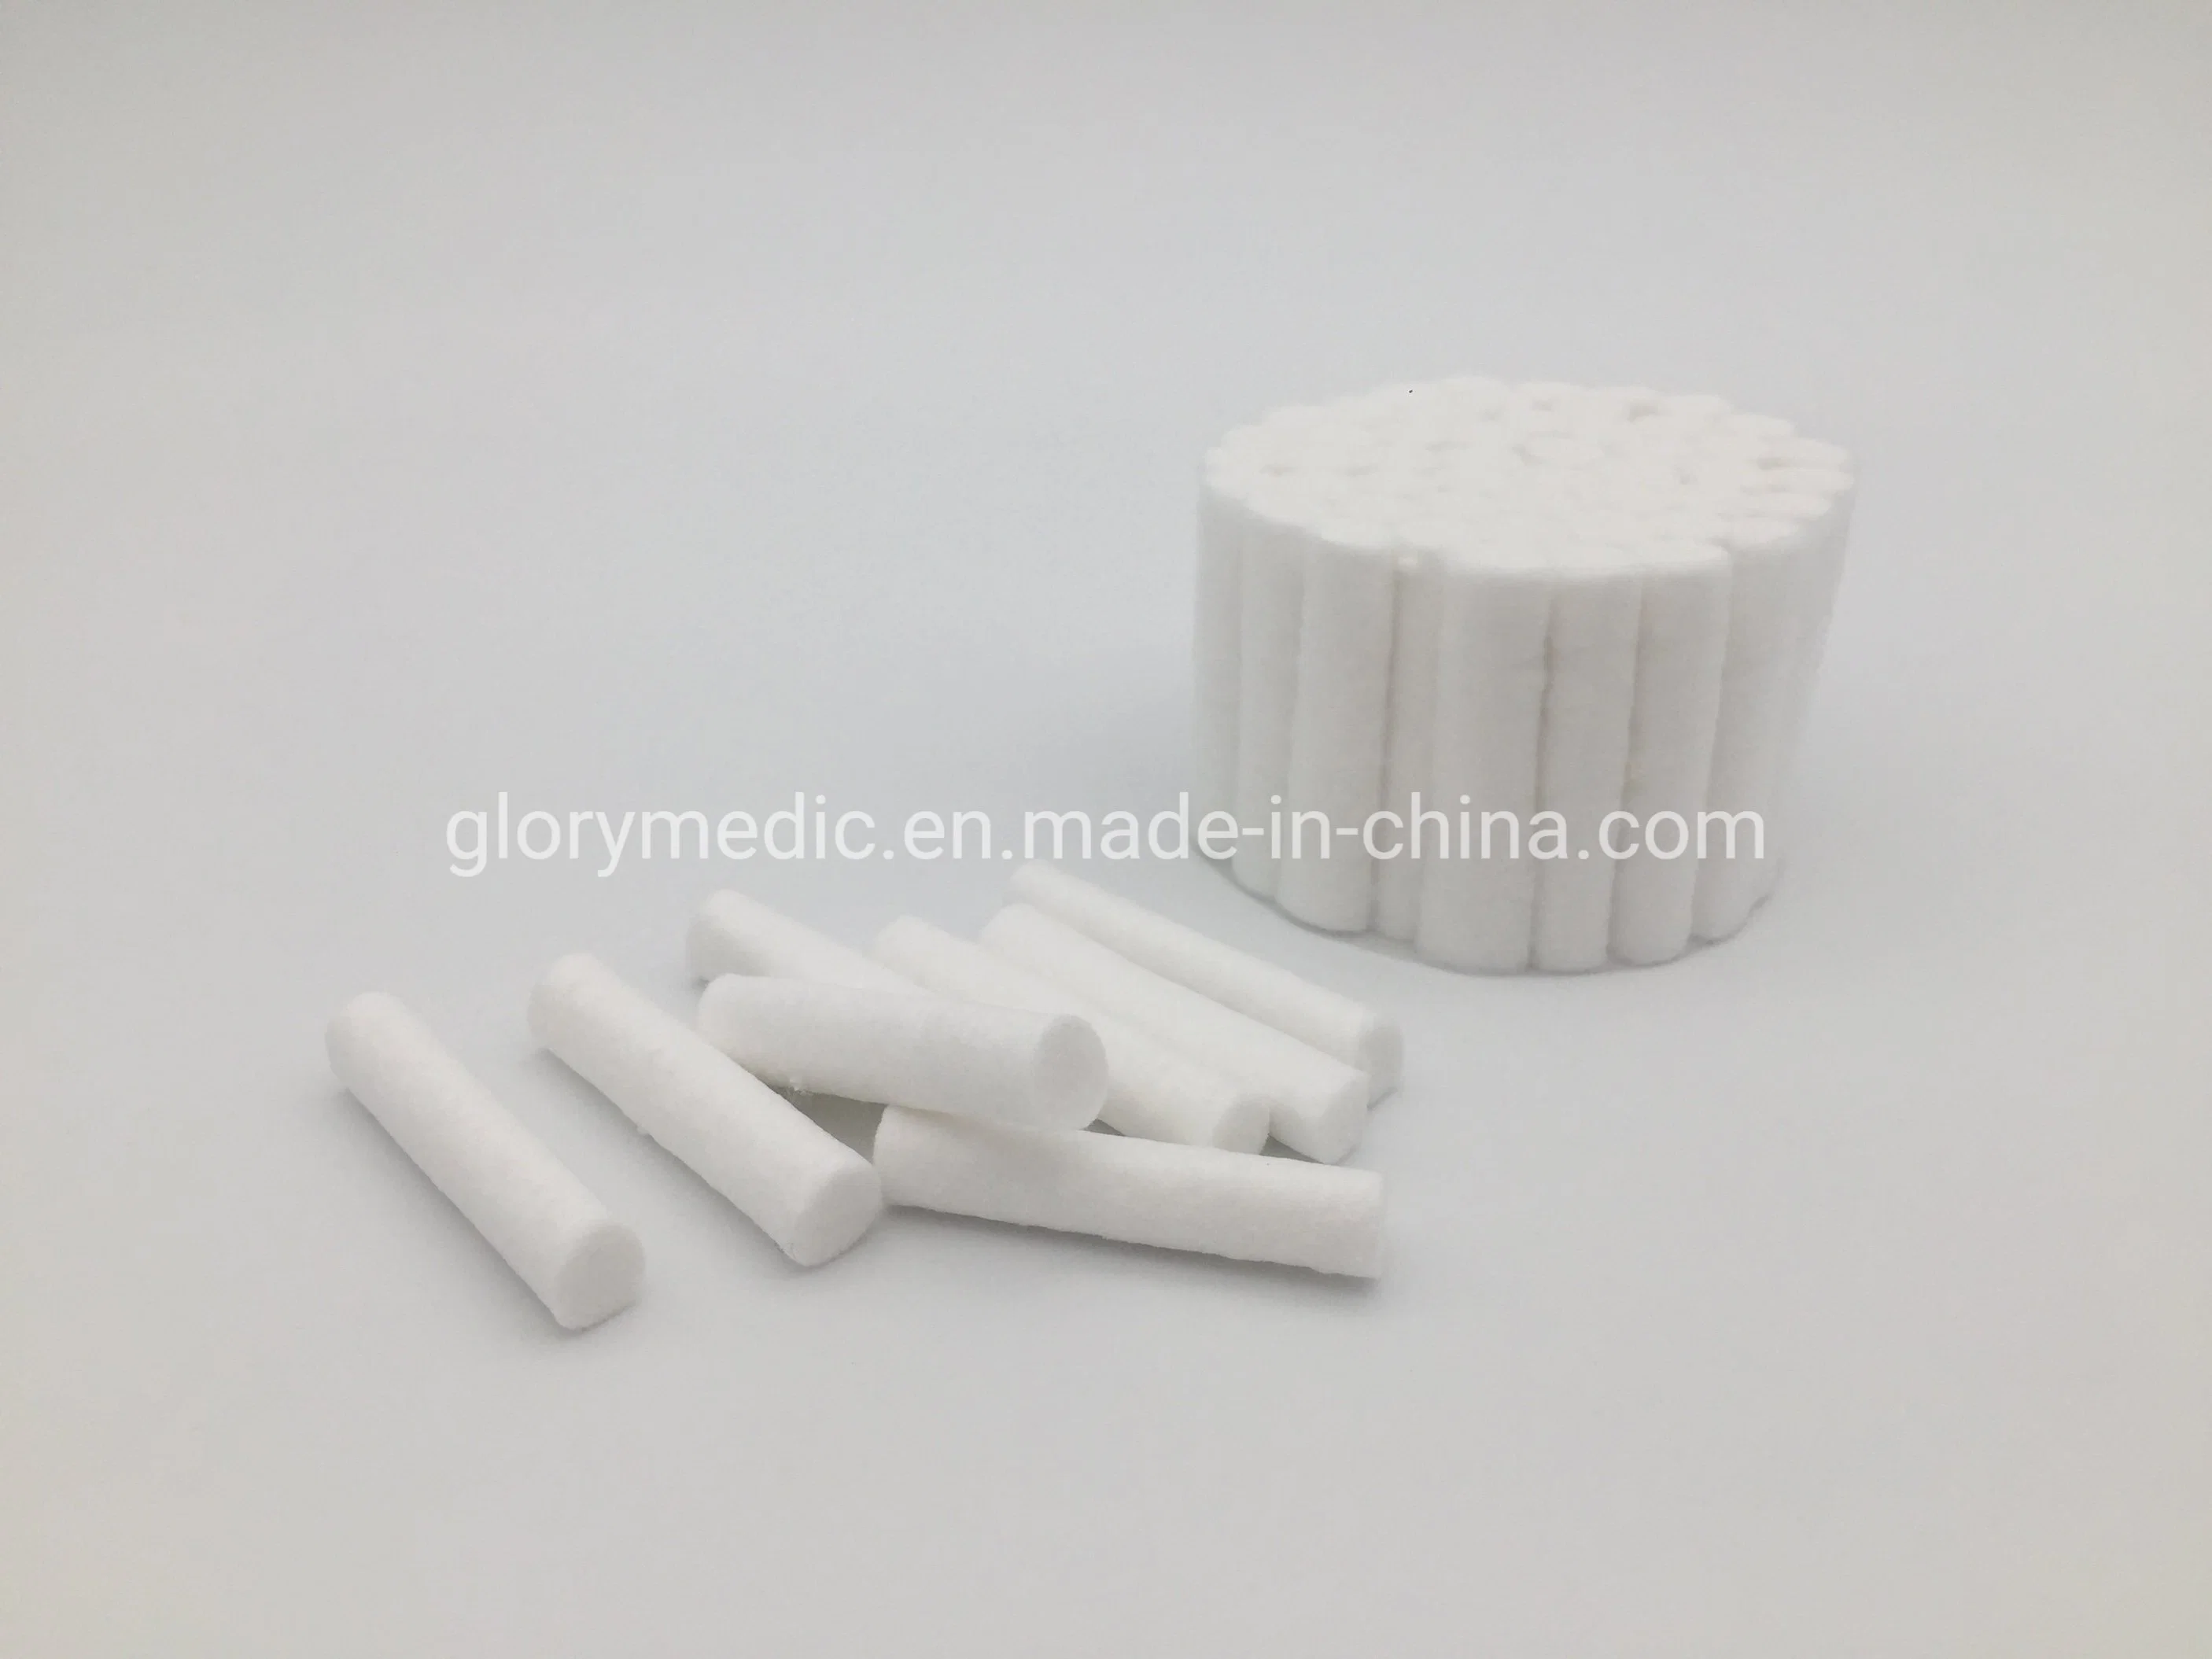 Disposable Medical Consumable Dental Materials Cotton Wool Roll Dental Products for Dentist